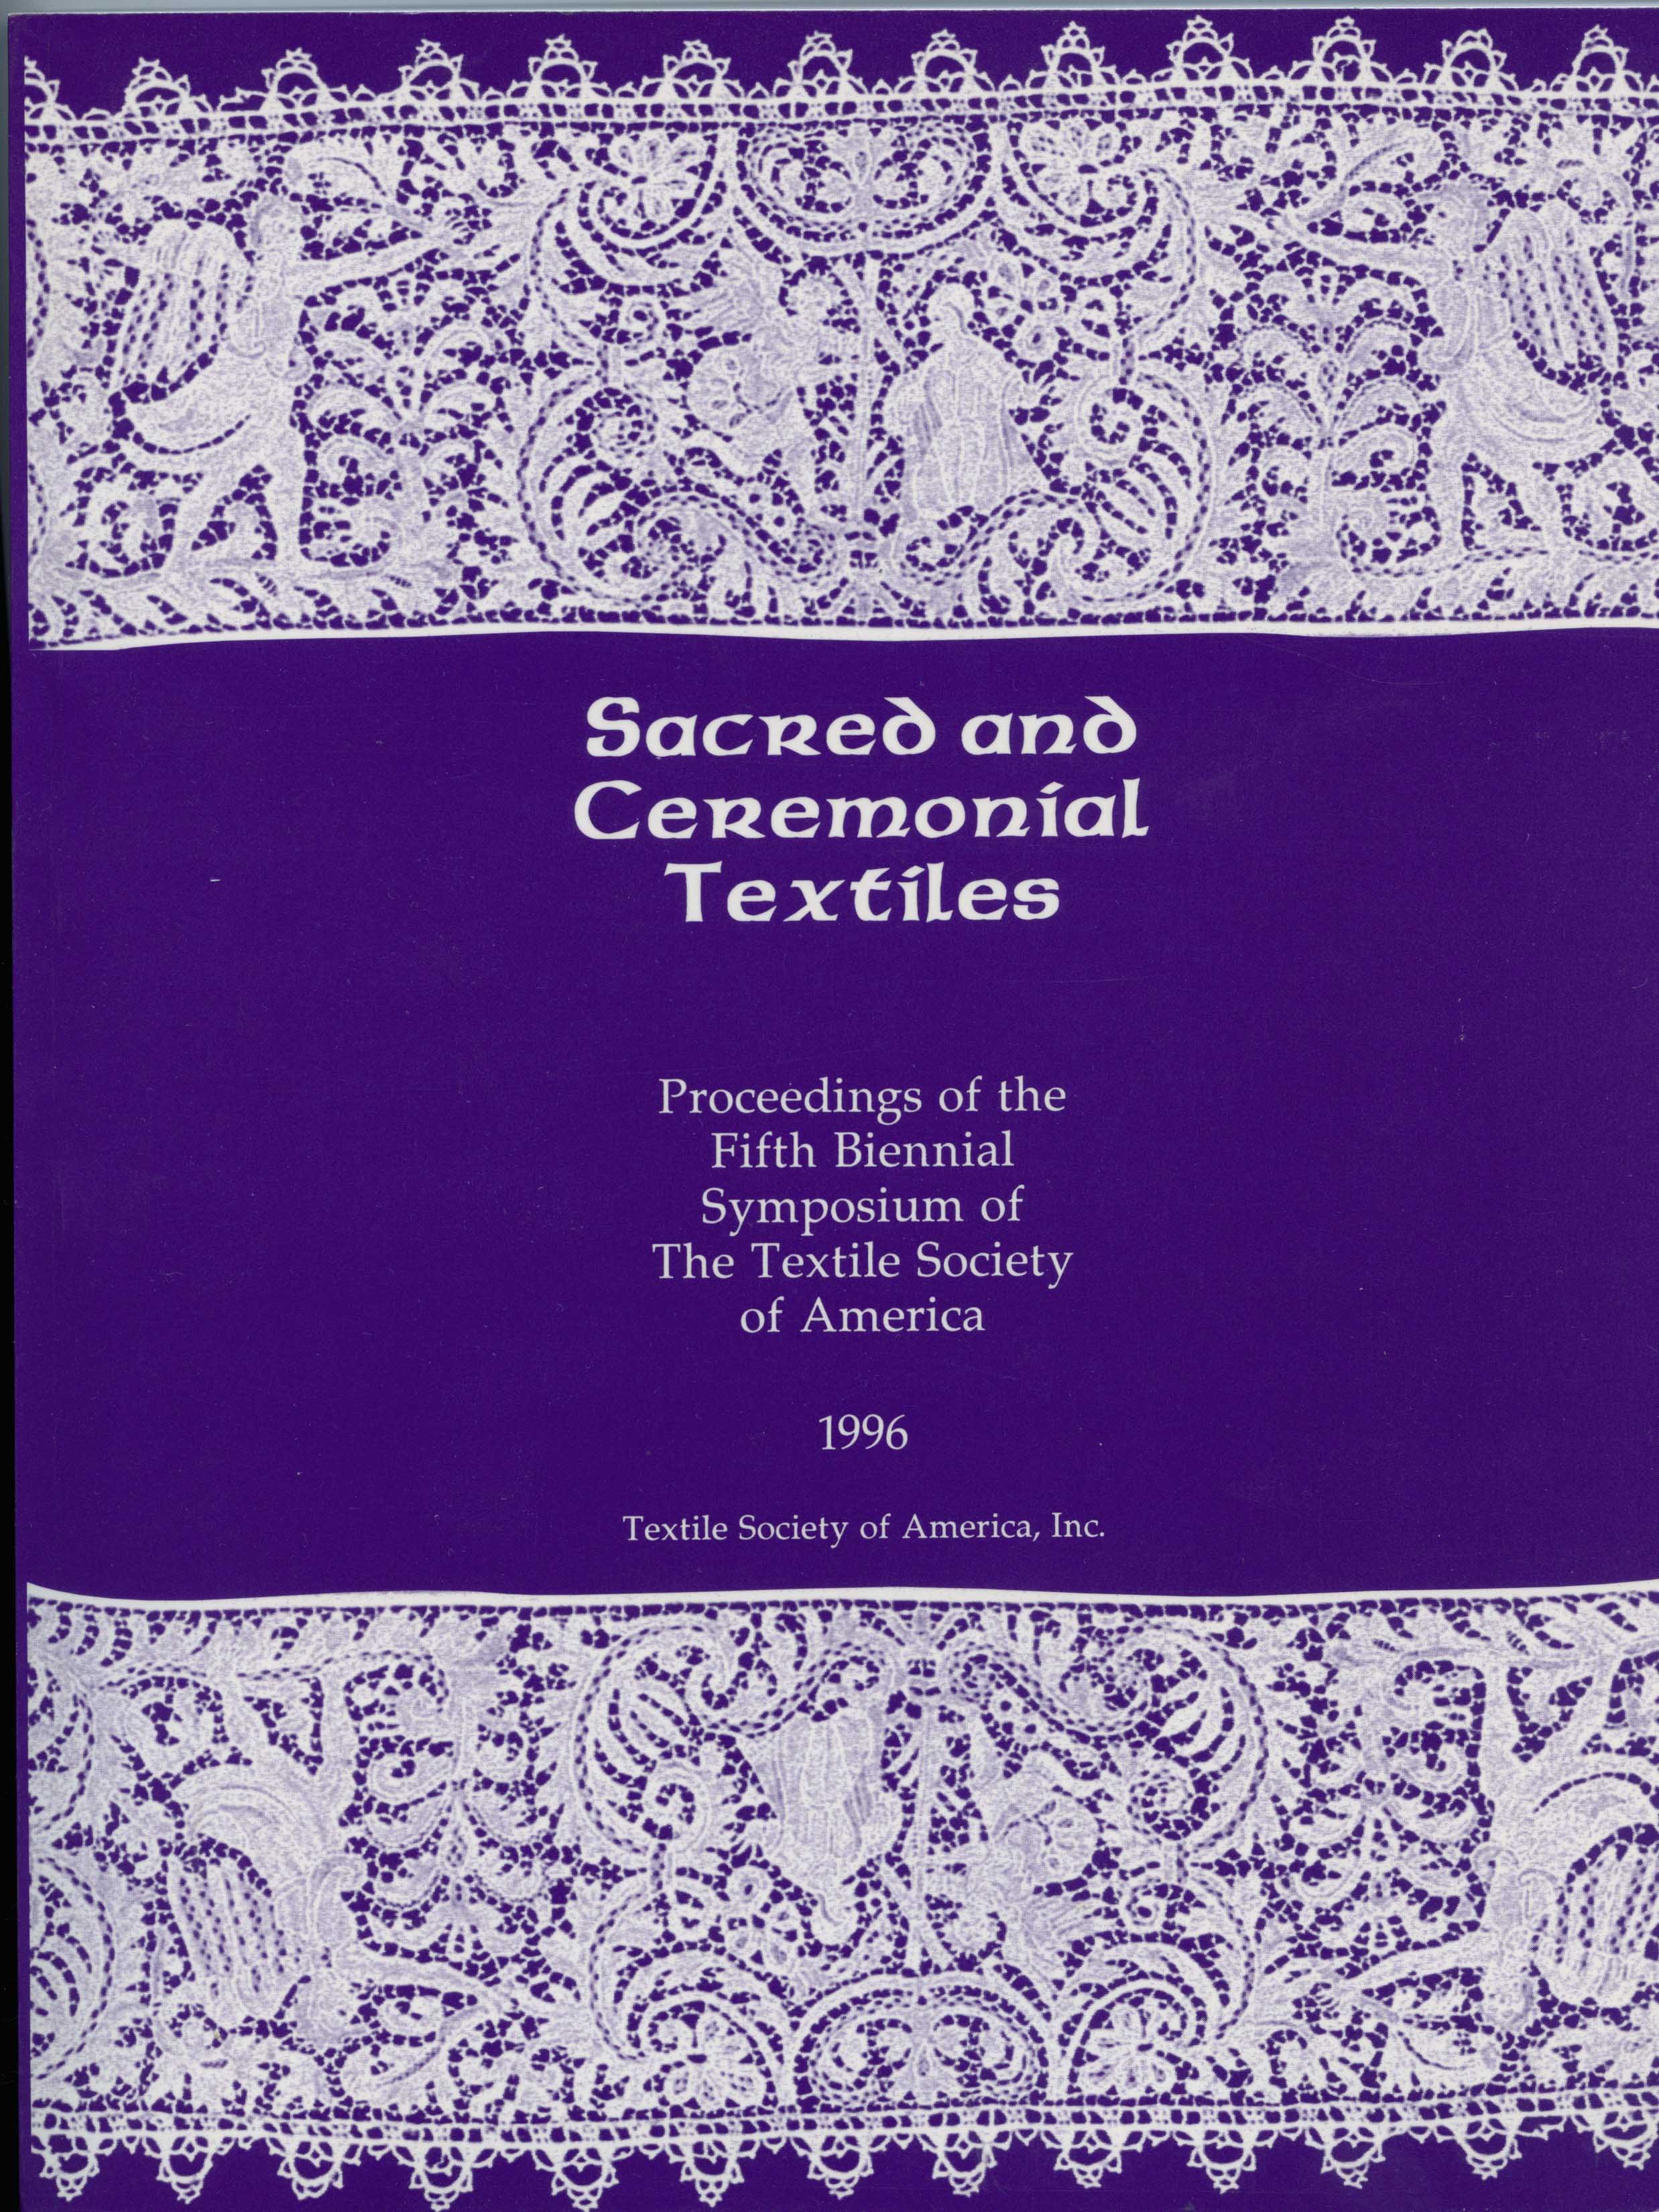 Sacred and Ceremonial Textiles, Proceedings of the Fifth Biennial Symposium of the Textile Society of America 1996